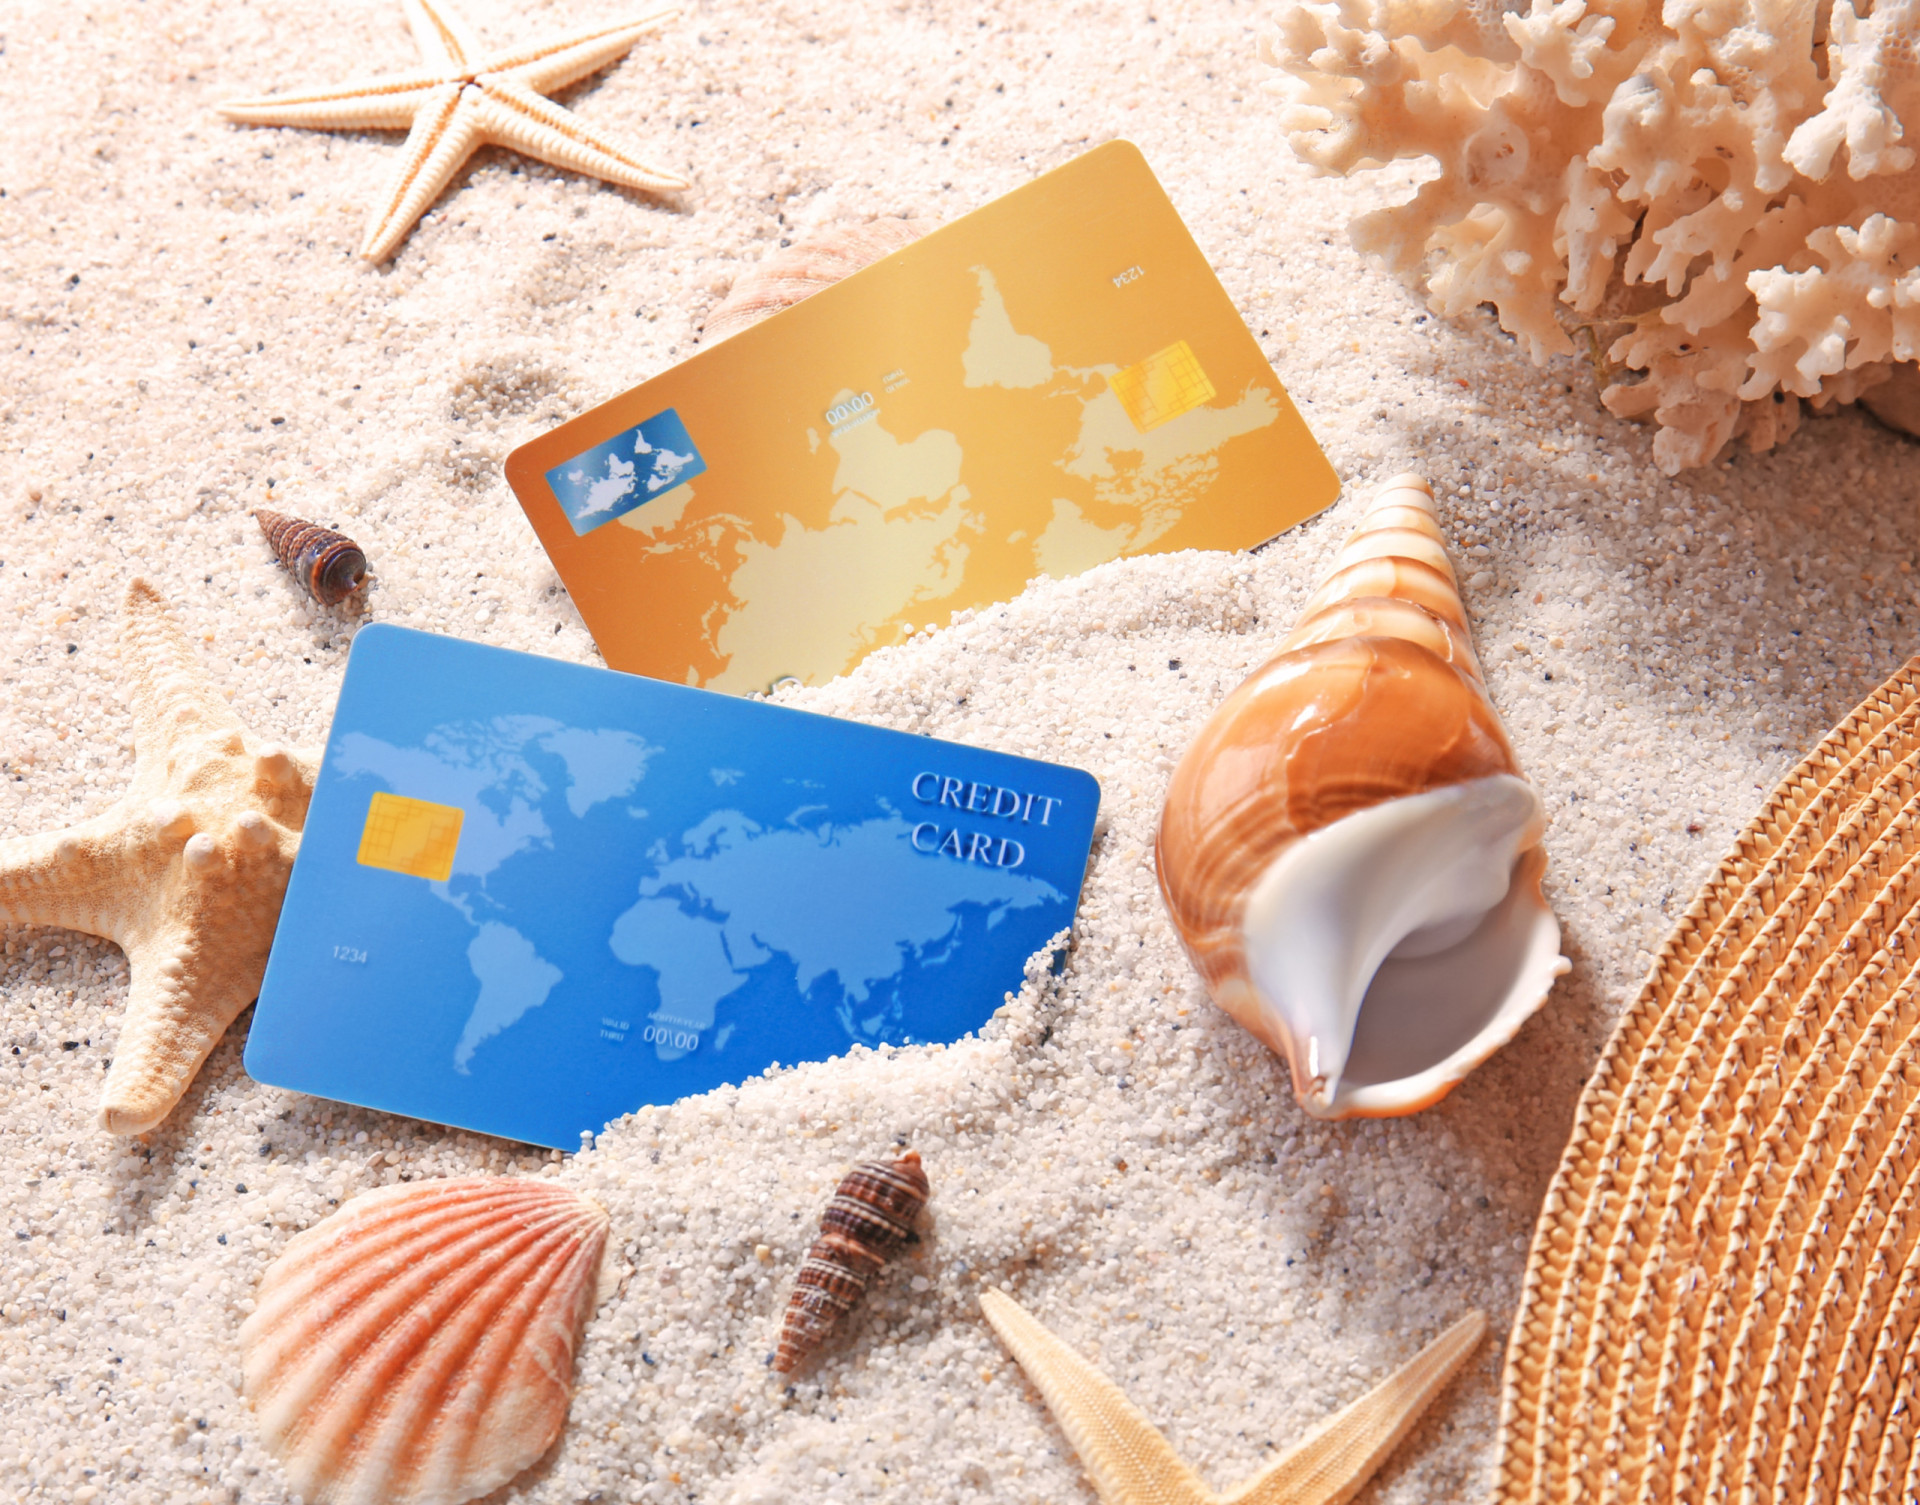 <p>In fact, in theory you shouldn't have to use your credit card or part with cash at any point throughout your stay.</p><p><a href="https://www.msn.com/en-us/community/channel/vid-7xx8mnucu55yw63we9va2gwr7uihbxwc68fxqp25x6tg4ftibpra?cvid=94631541bc0f4f89bfd59158d696ad7e">Follow us and access great exclusive content every day</a></p>